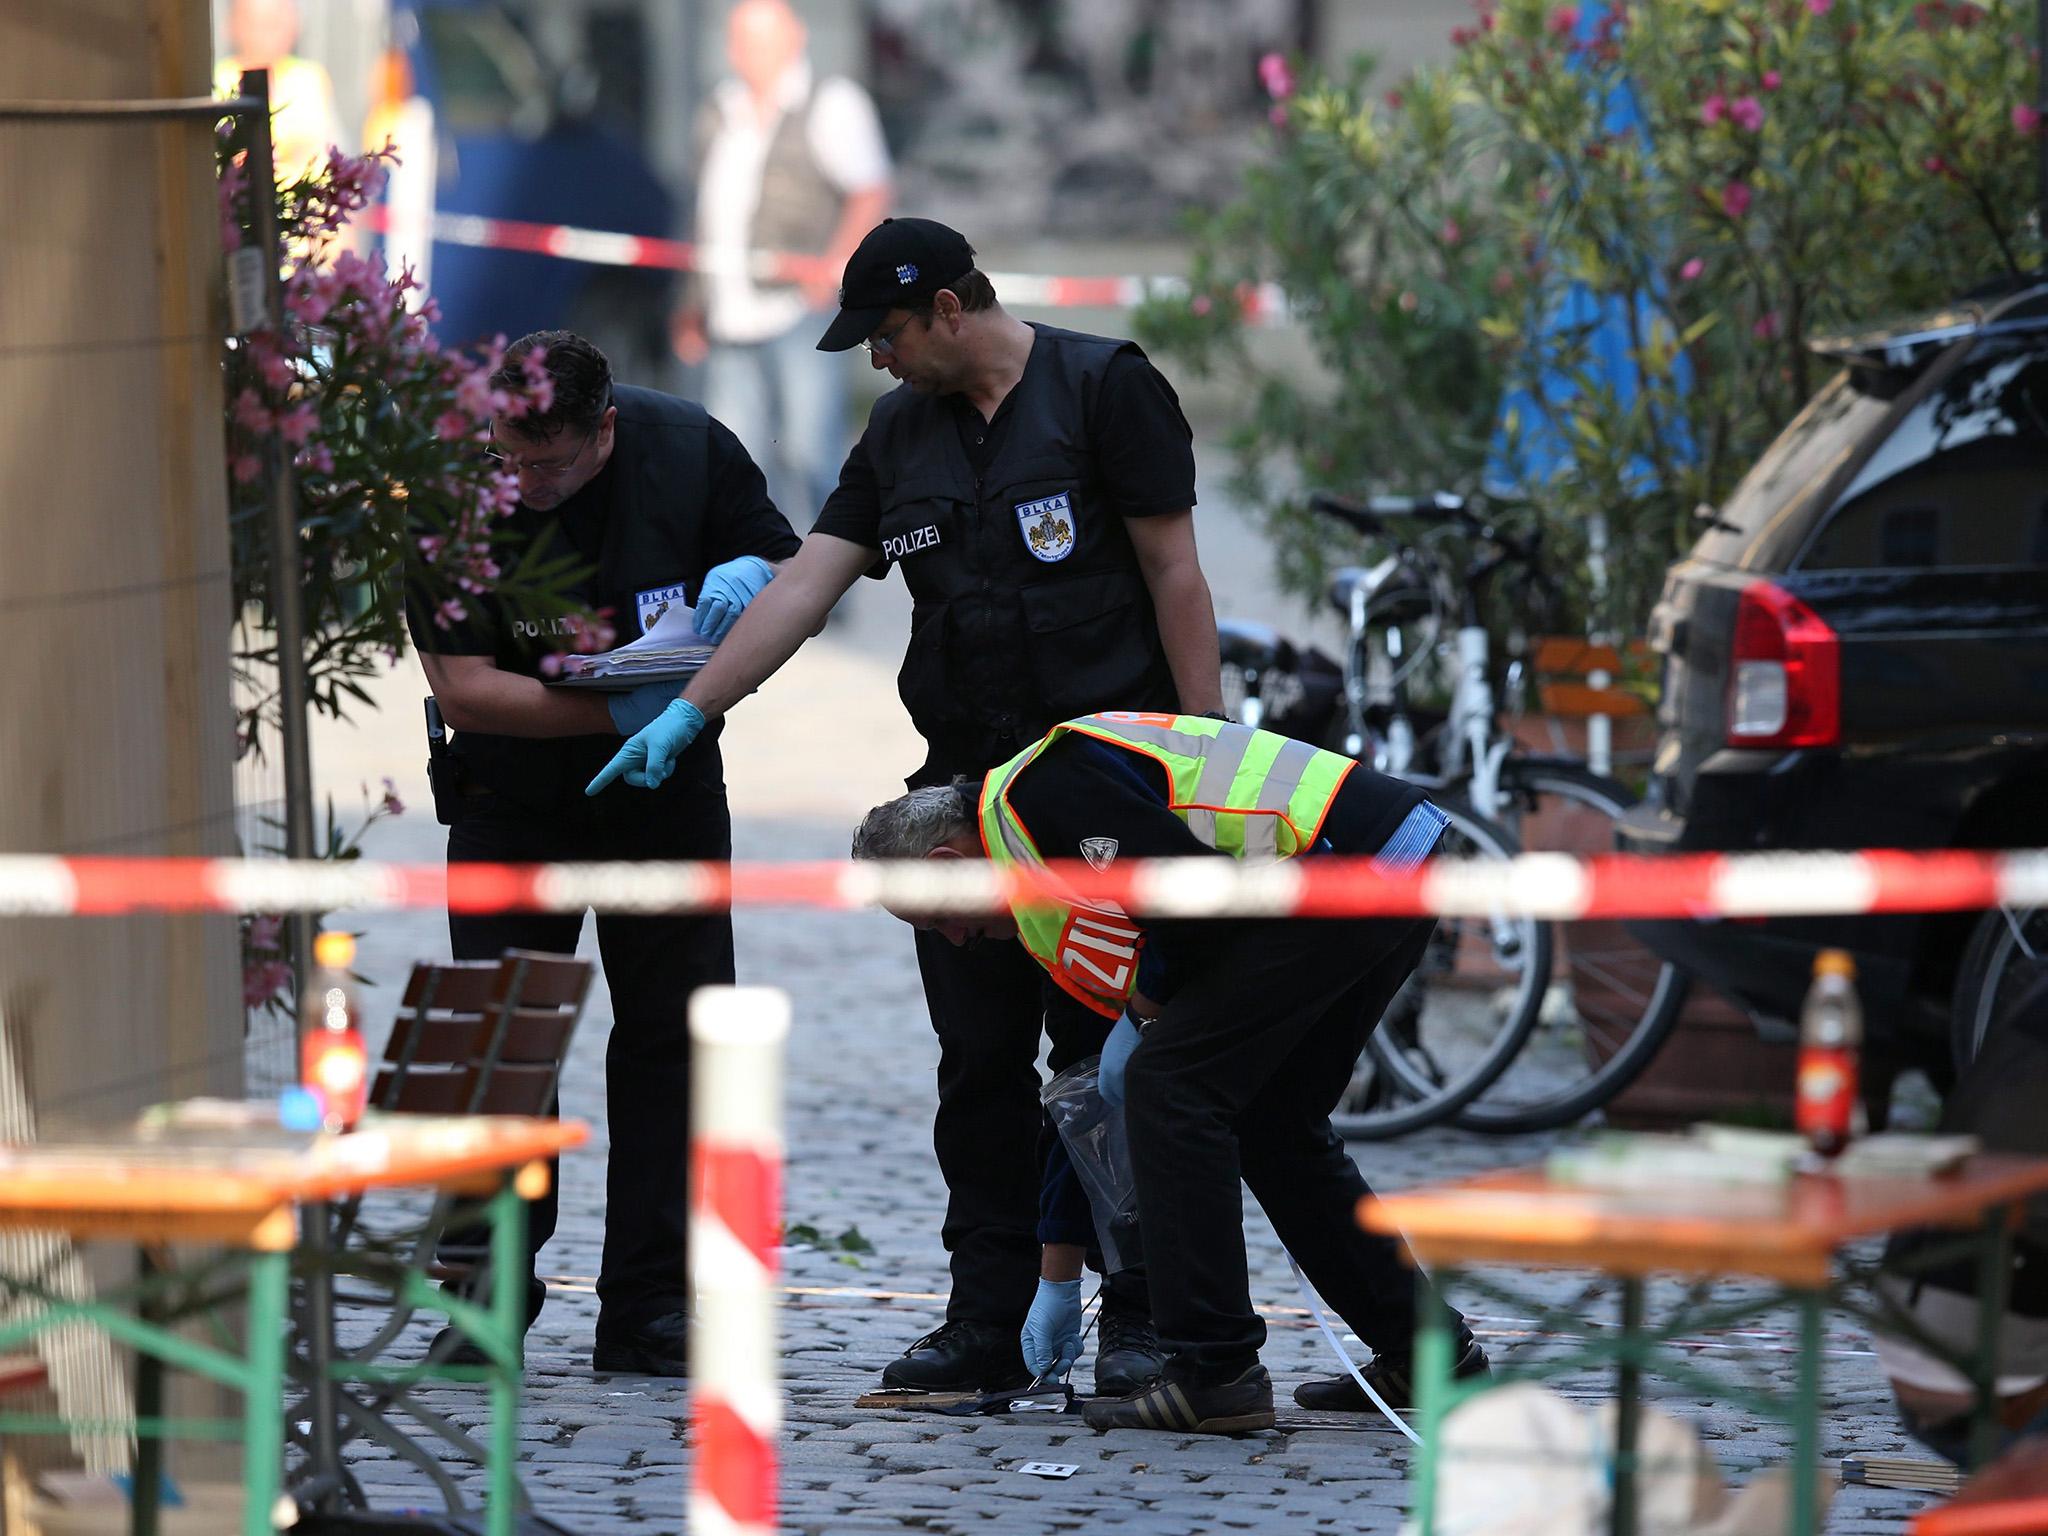 Police officers operate on a scene following an explosion in Ansbach, Germany,